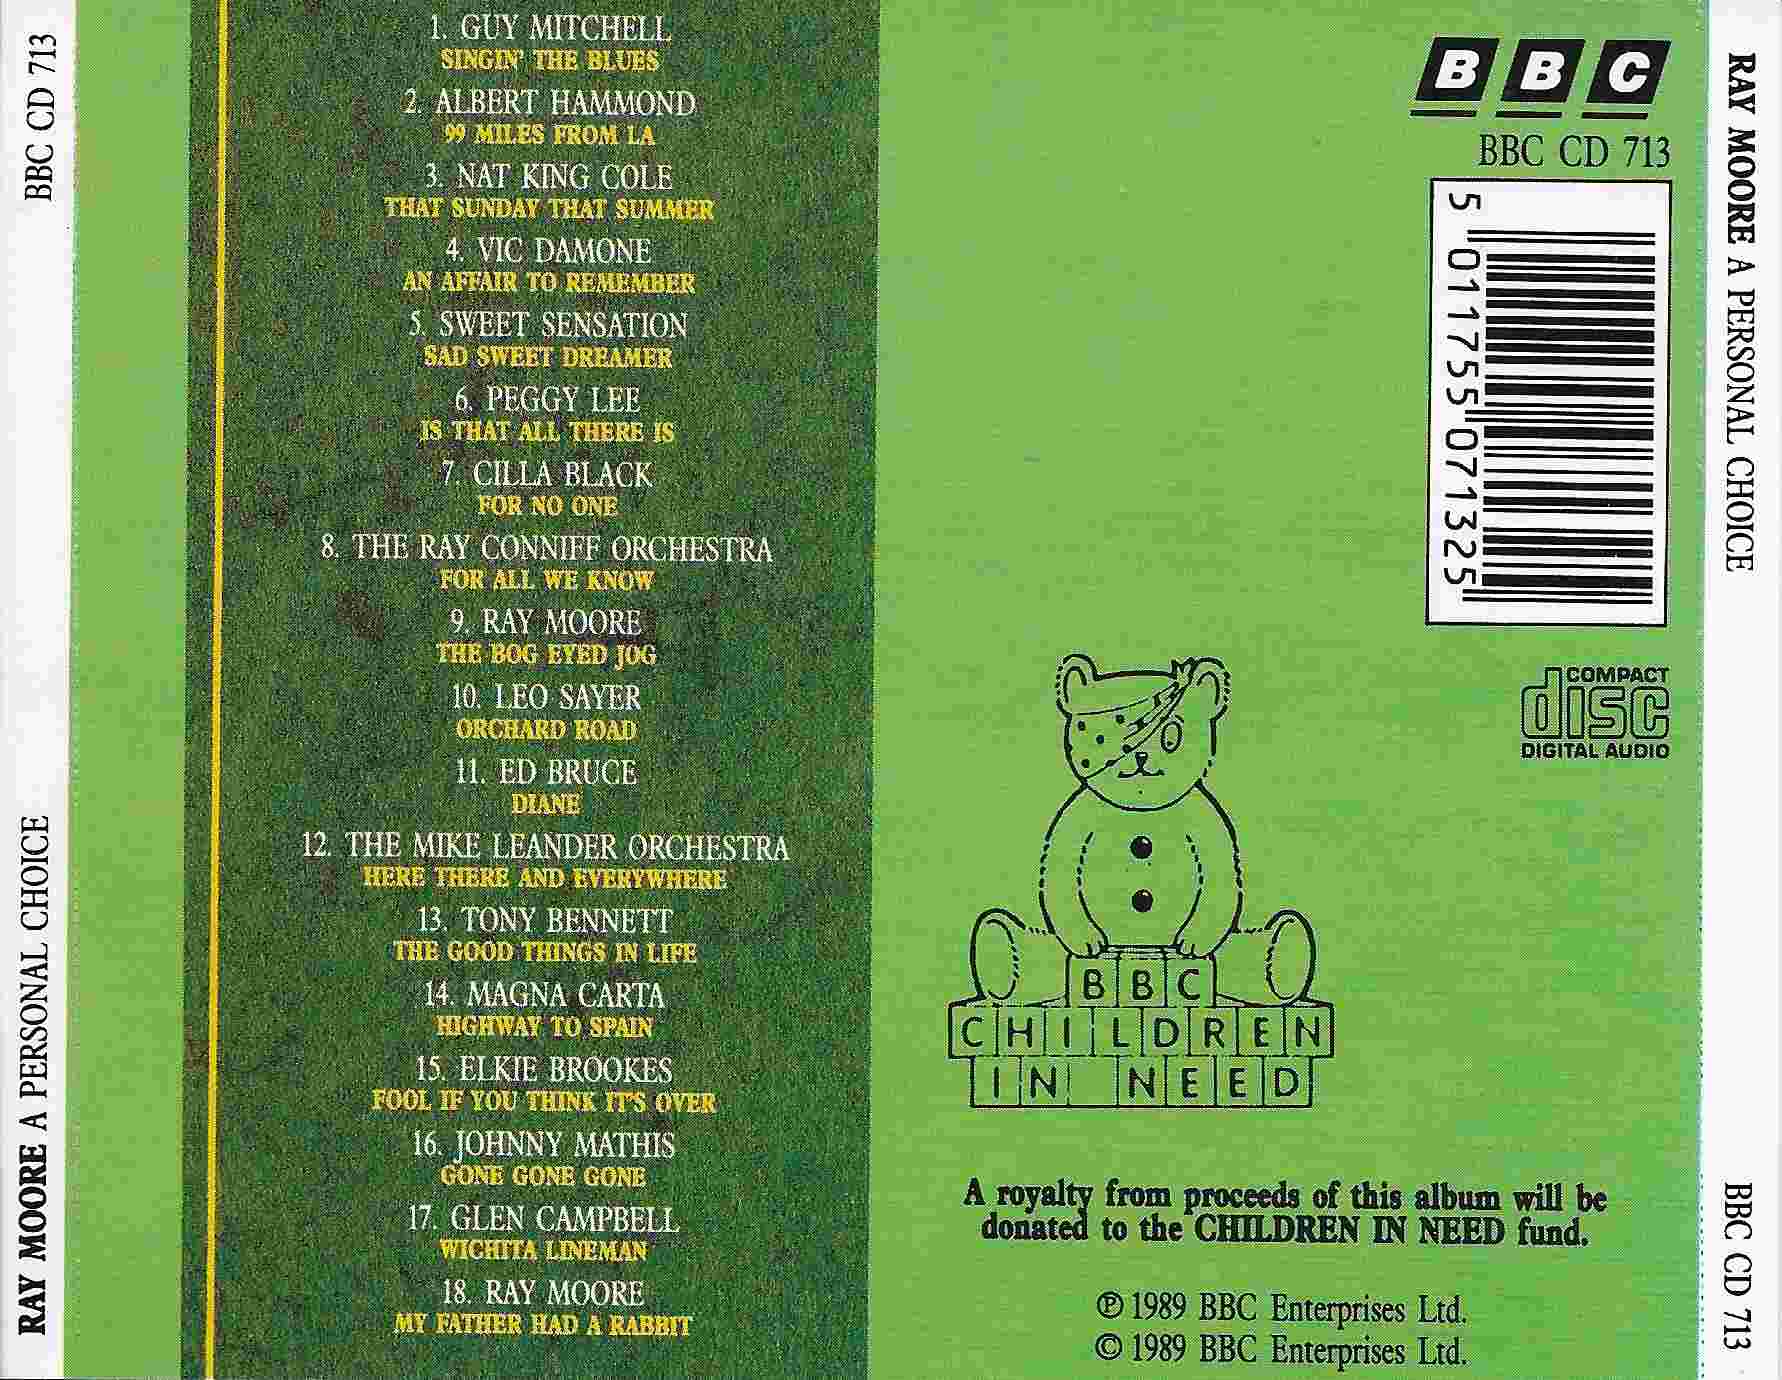 Back cover of BBCCD713